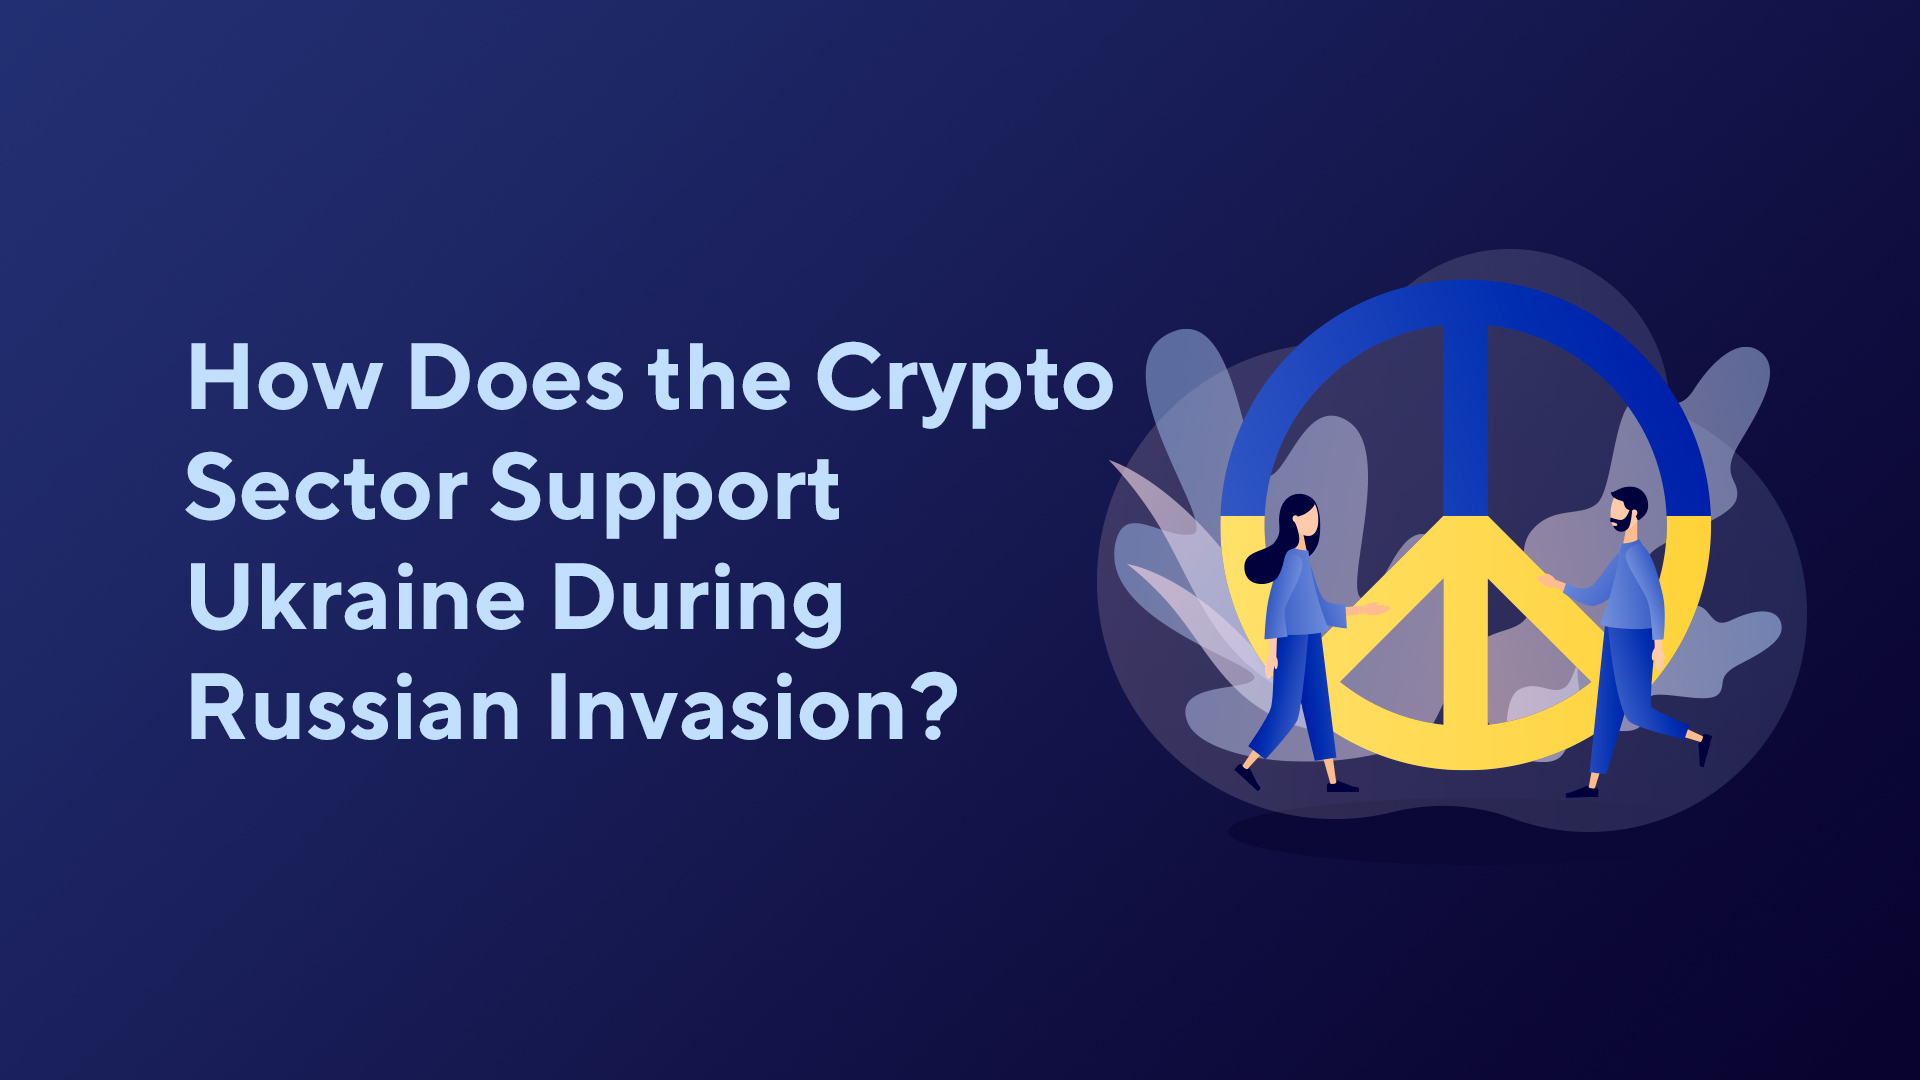 How Does the Crypto Sector Support Ukraine During Russian Invasion?